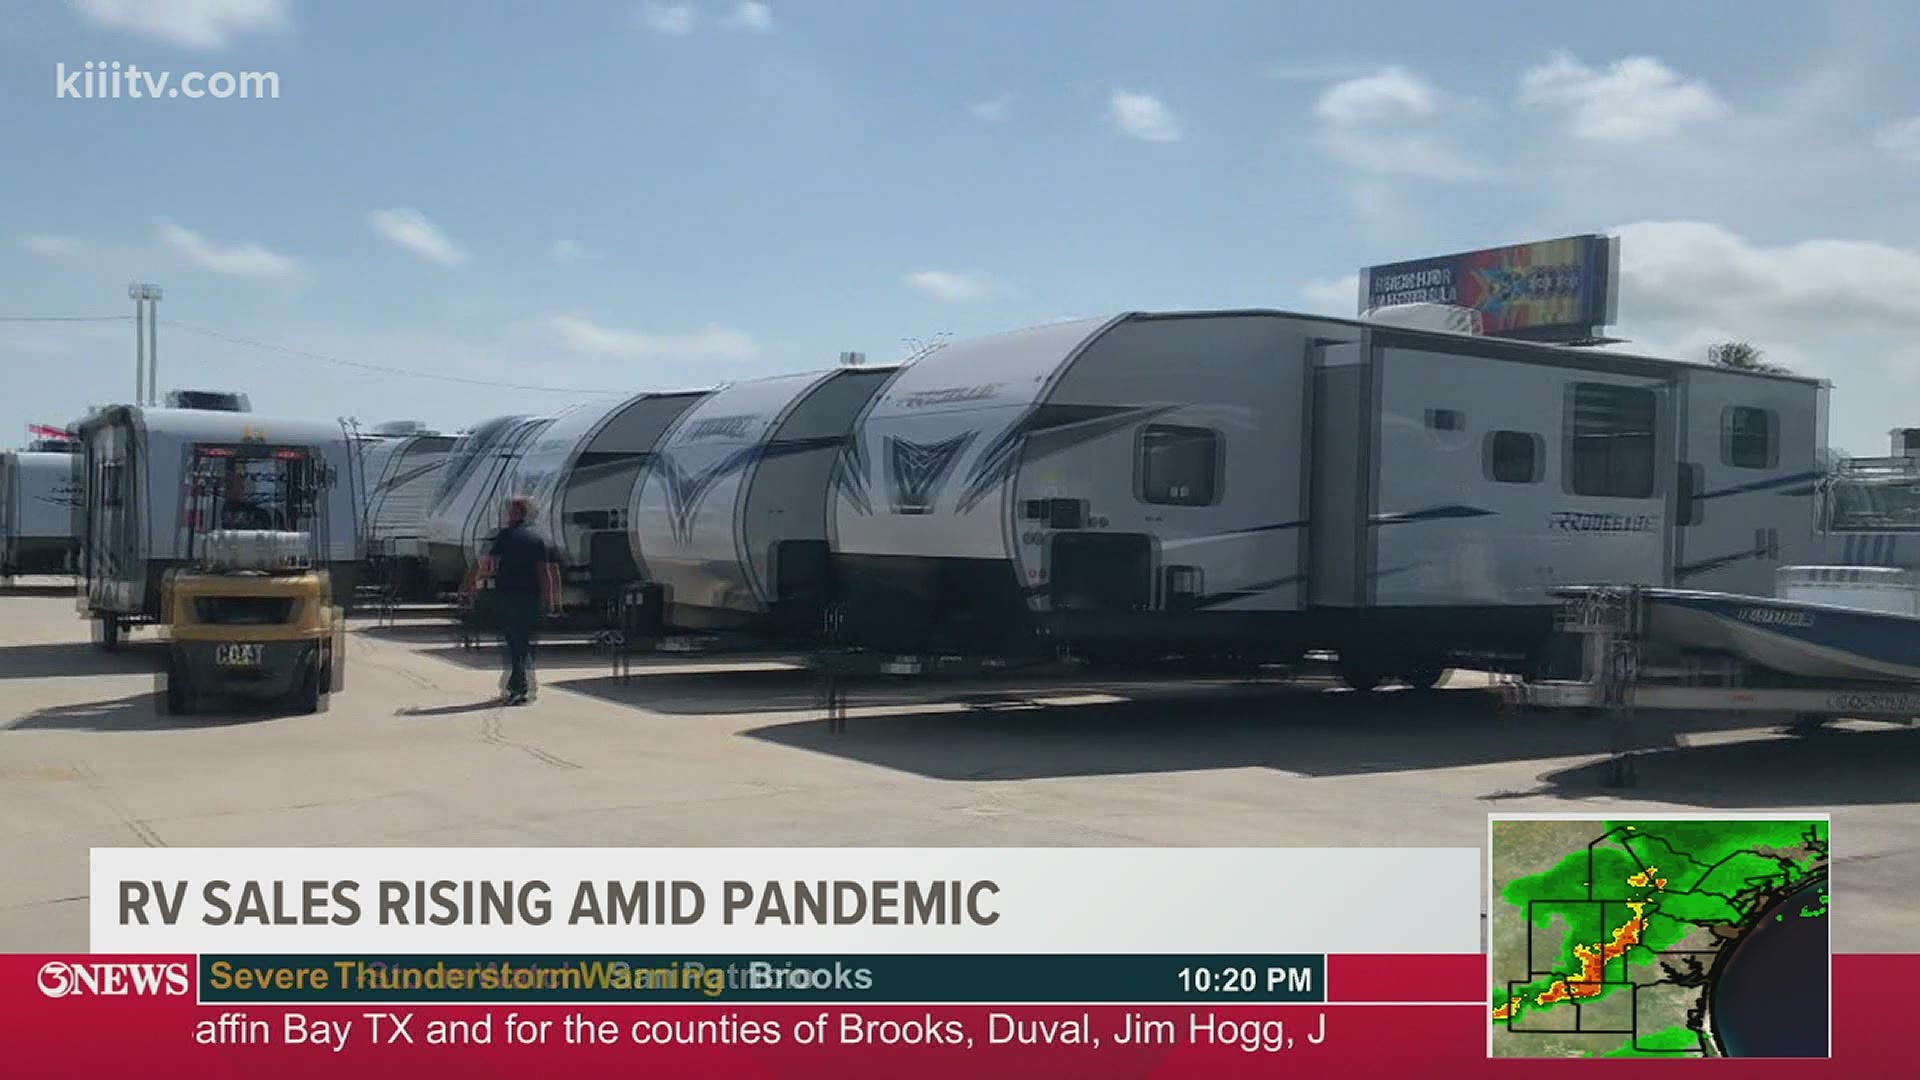 David Shely with Ron Hoover RV & Marine of Corpus Christi says since the pandemic began, they’ve seen an increase in RV purchases.